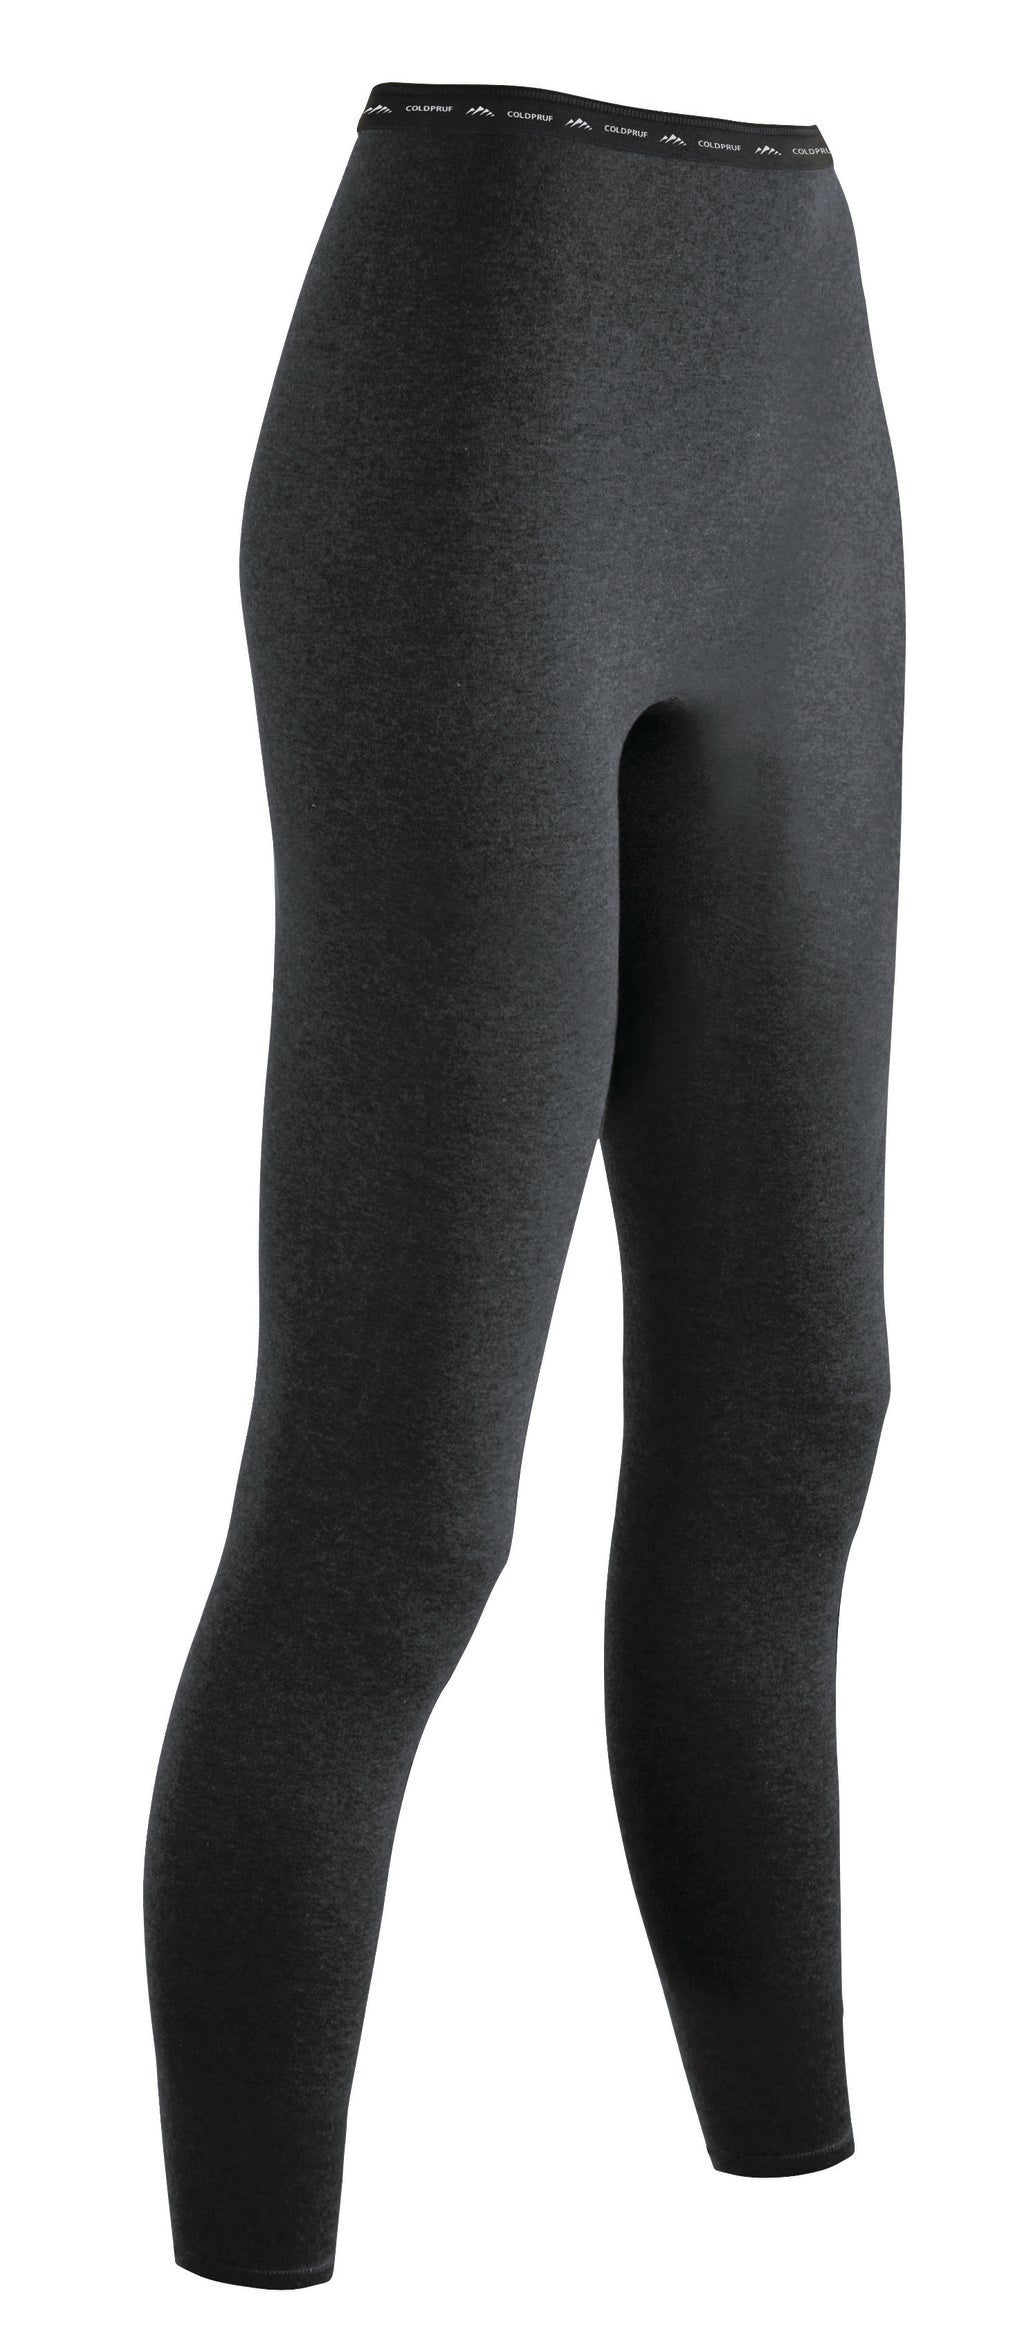 ColdPruf Enthusiast Women's Base Layer Bottom